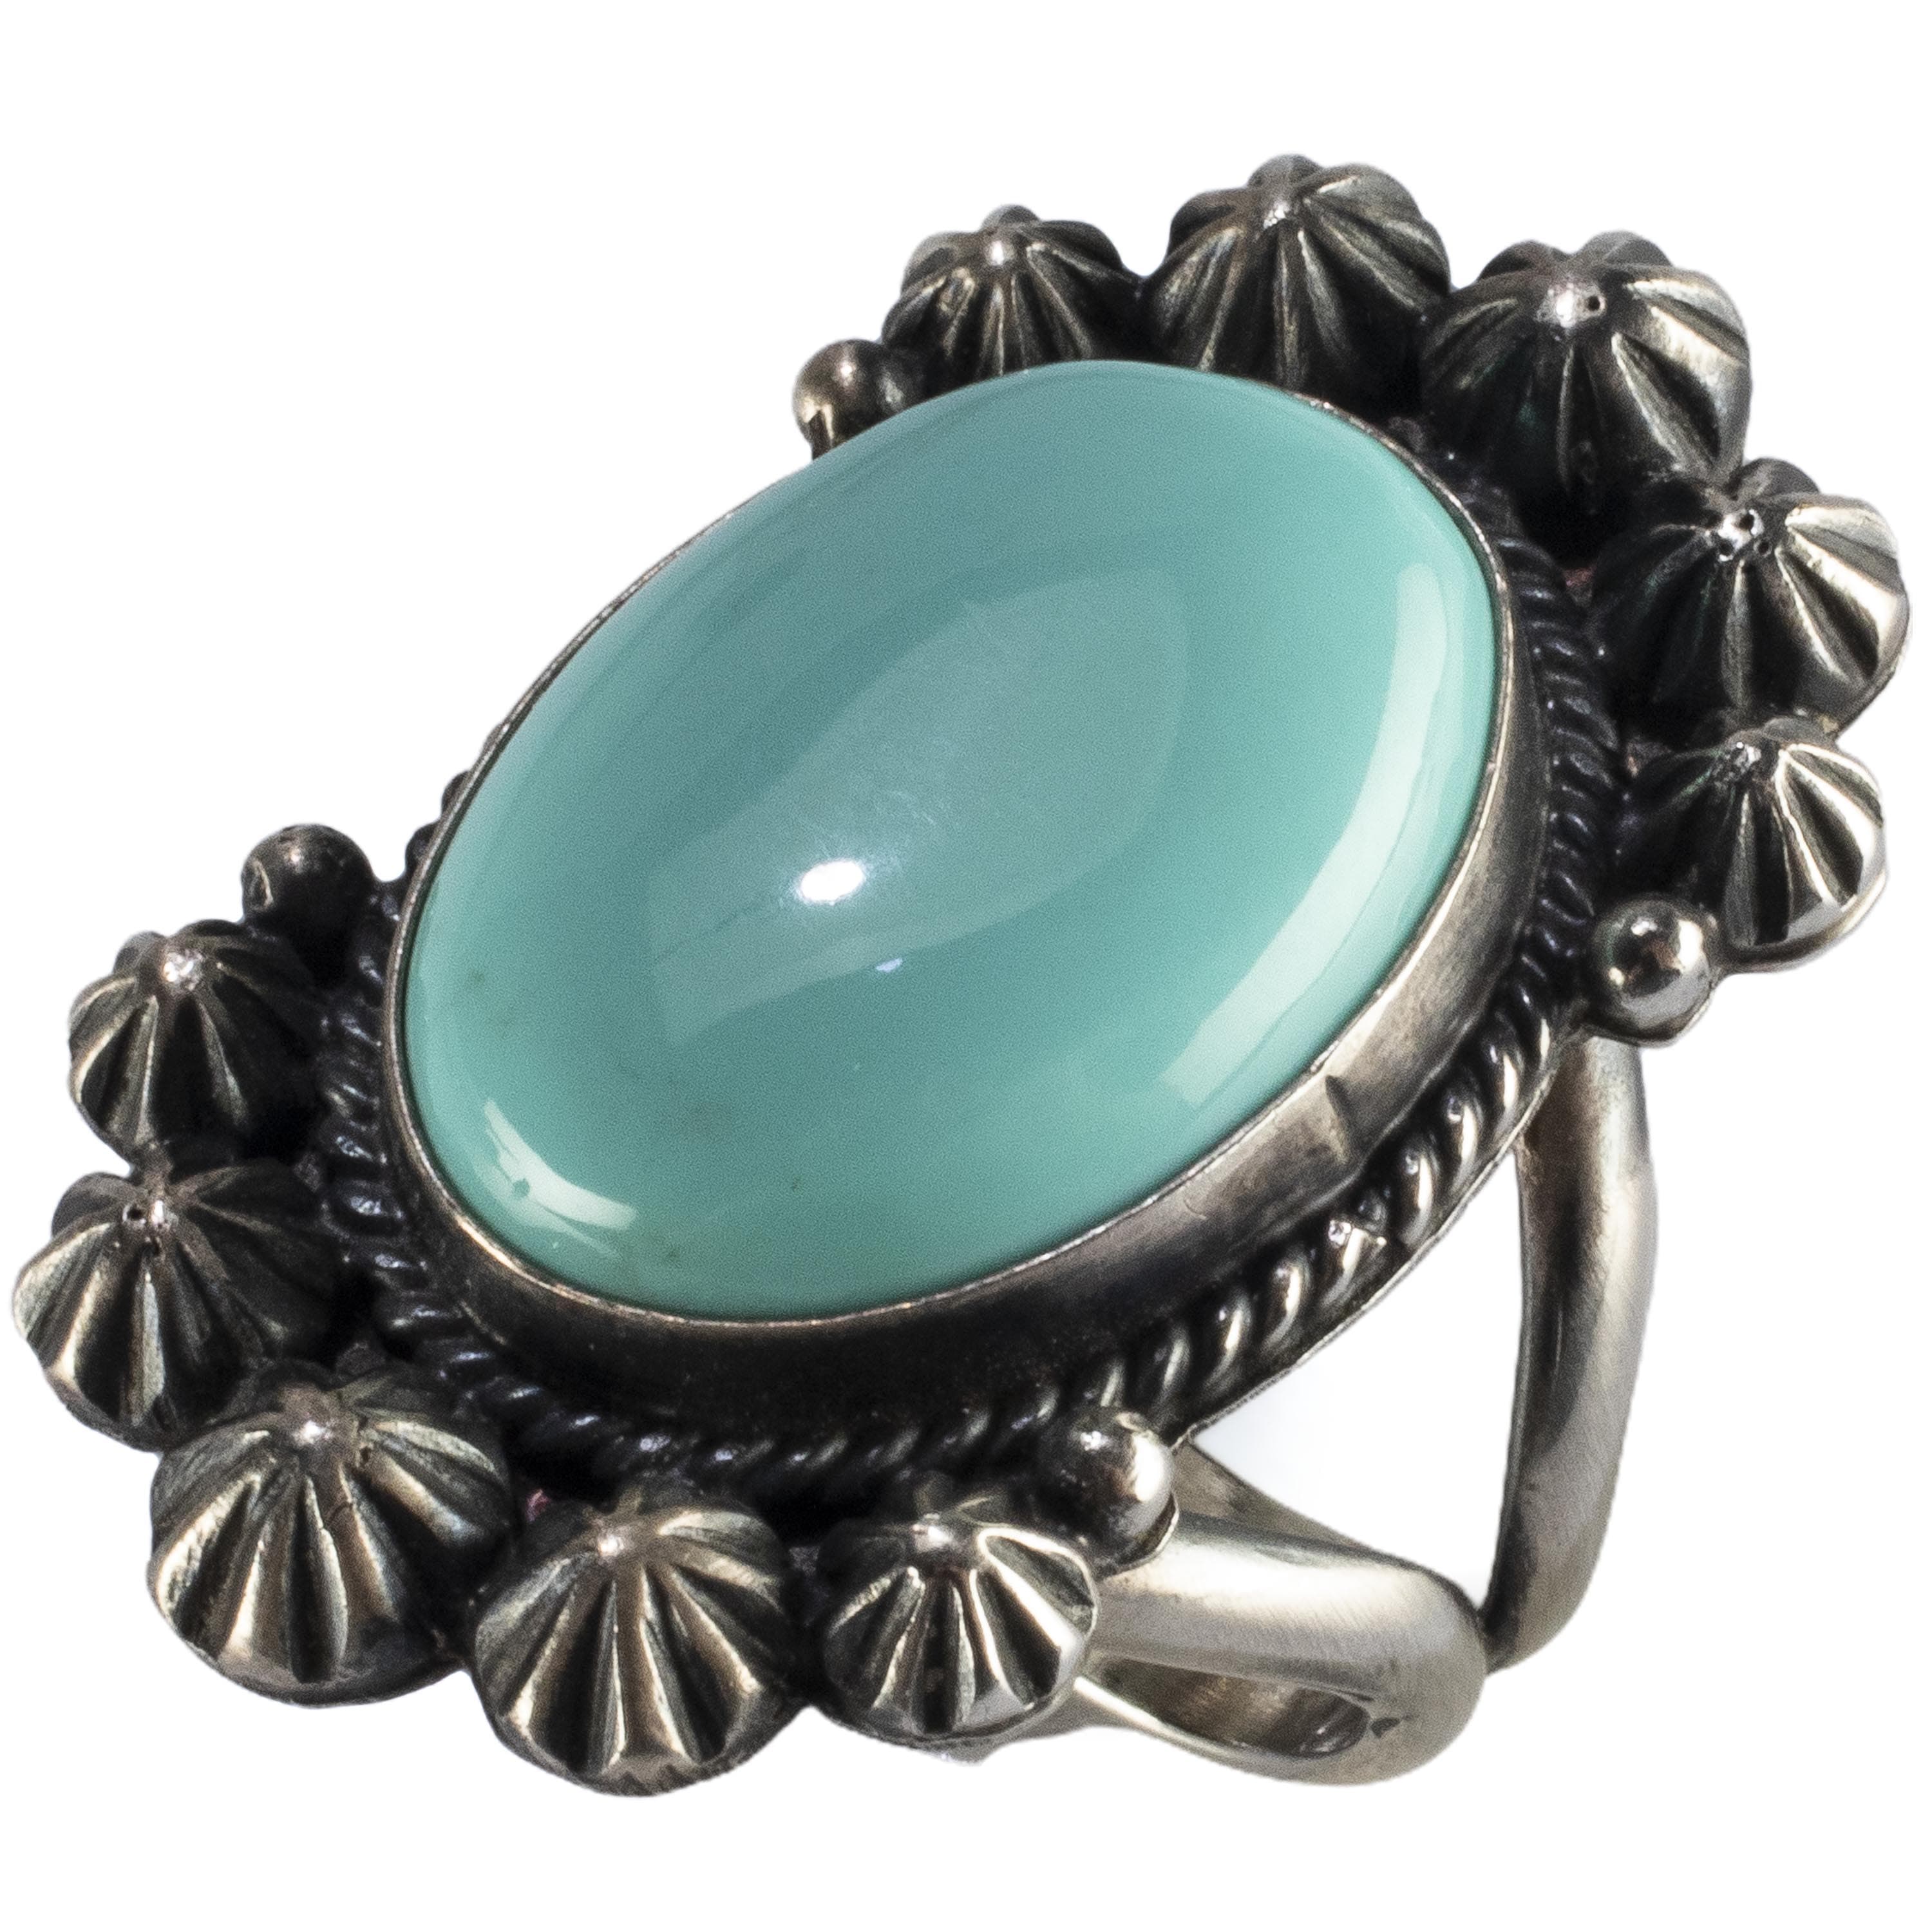 Kalifano Native American Jewelry 6 Michael & Rose Calladitto Navajo Campitos Turquoise USA Native American Made 925 Sterling Silver Ring NAR500.070.6